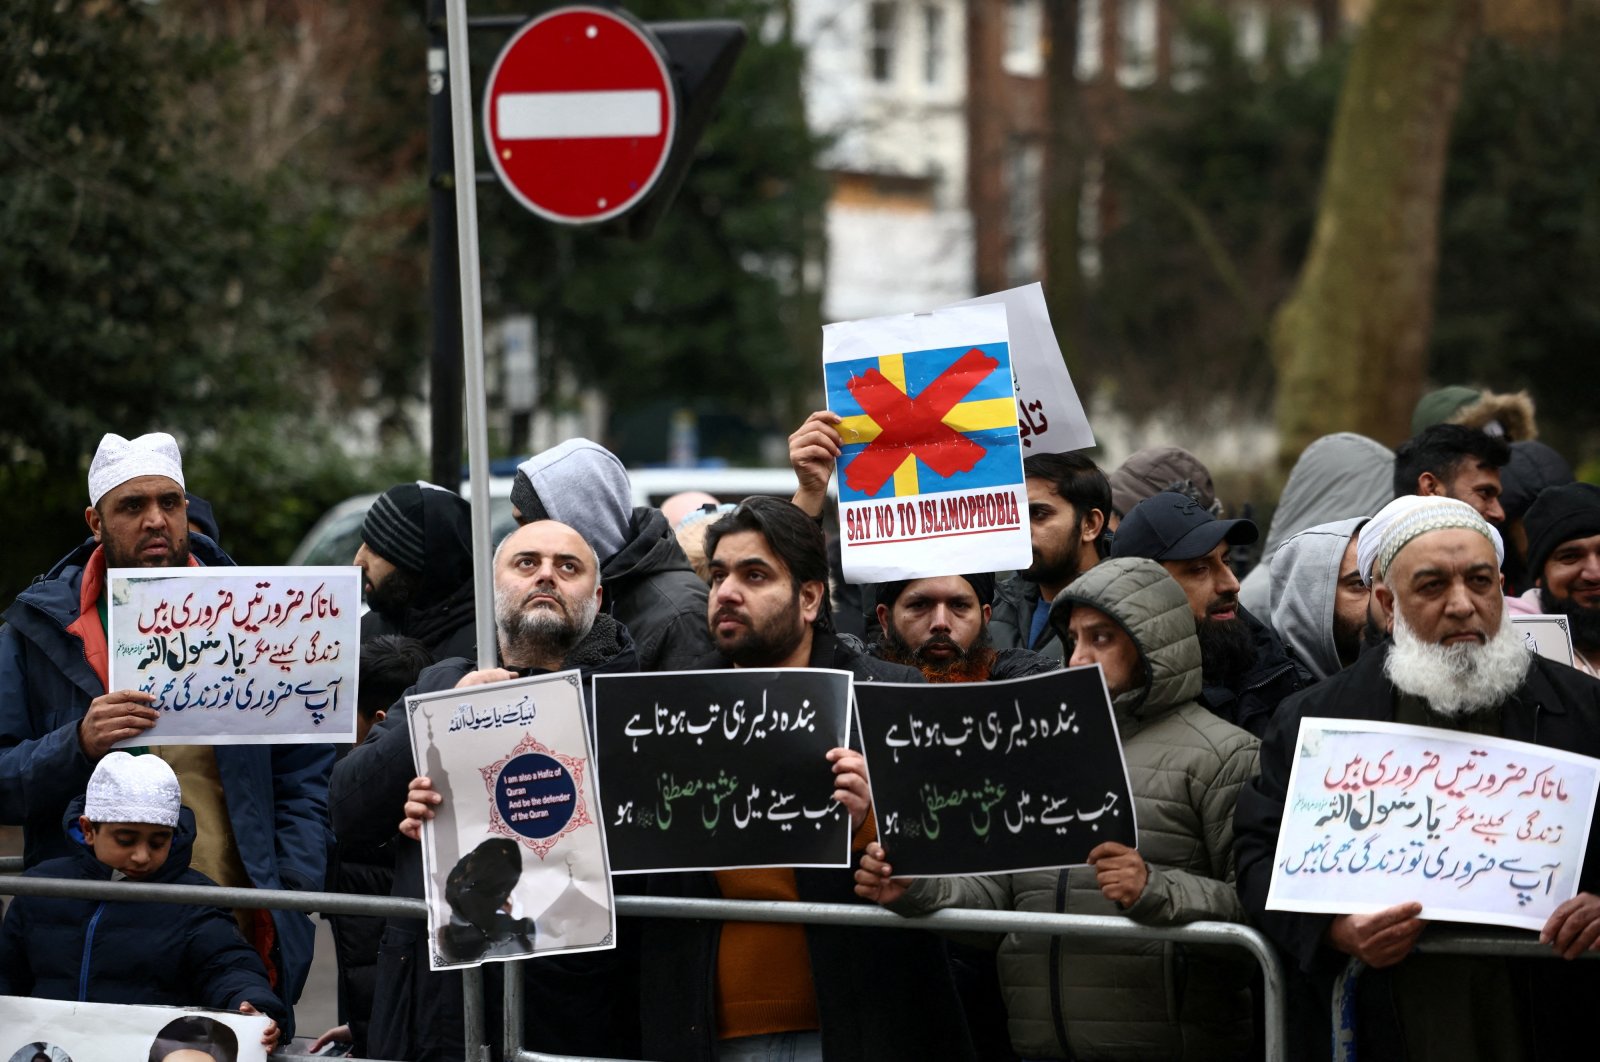 People attend a protest following the burning of the Quran in Stockholm, outside the Swedish Embassy in London, Britain, Jan. 28, 2023. (Reuters Photo)